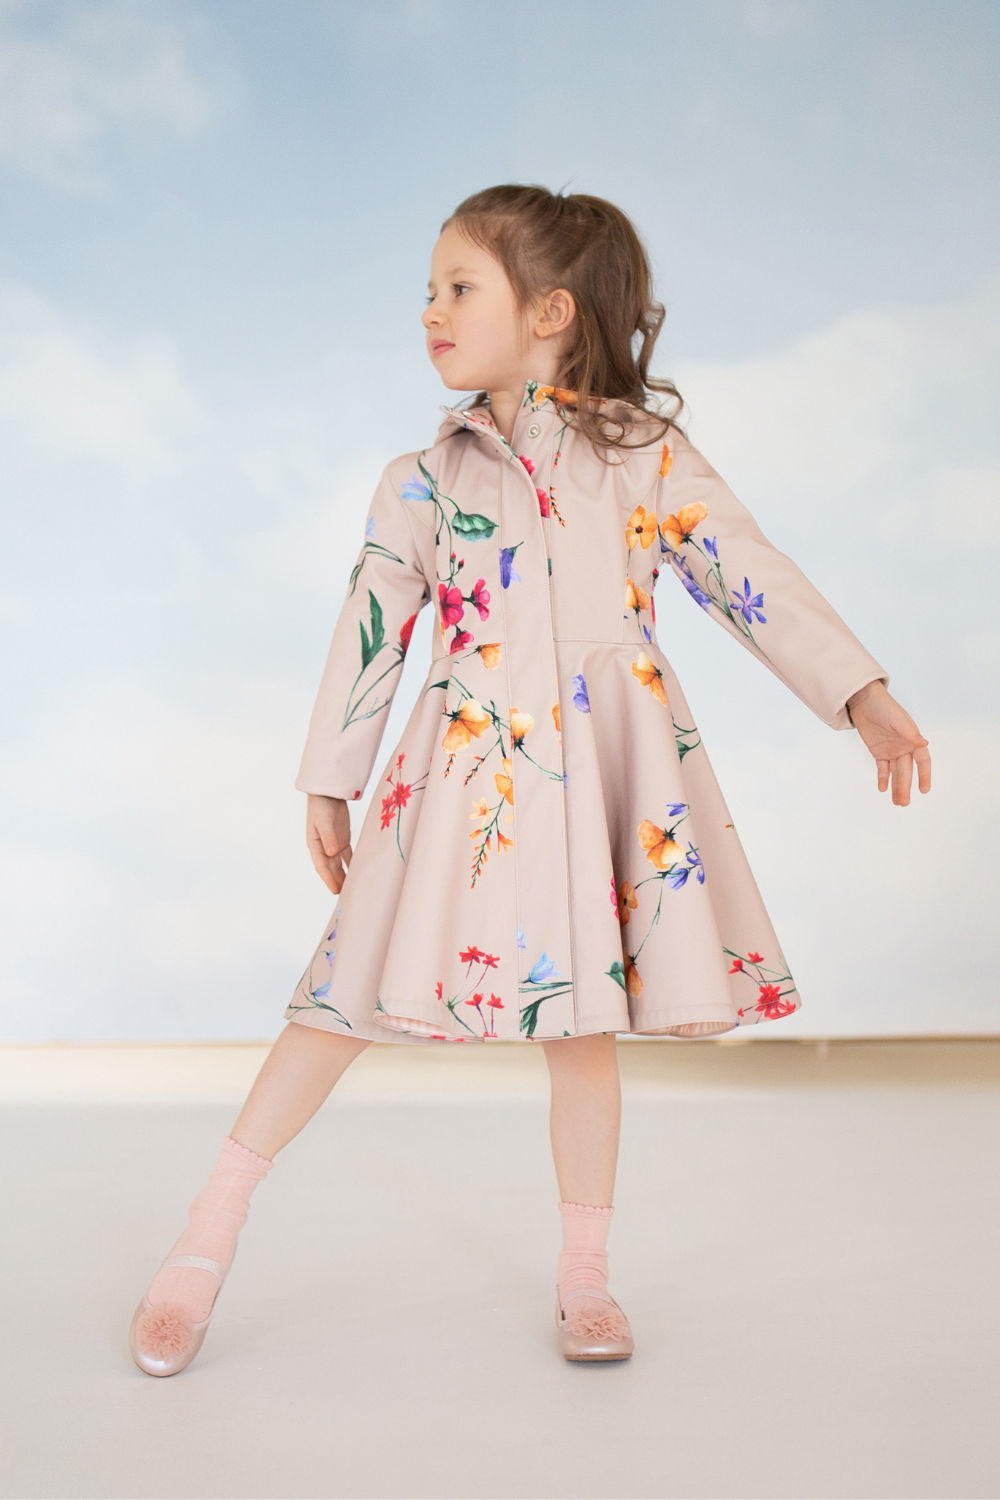 Beige waterproof coat for girls with colorful flower print